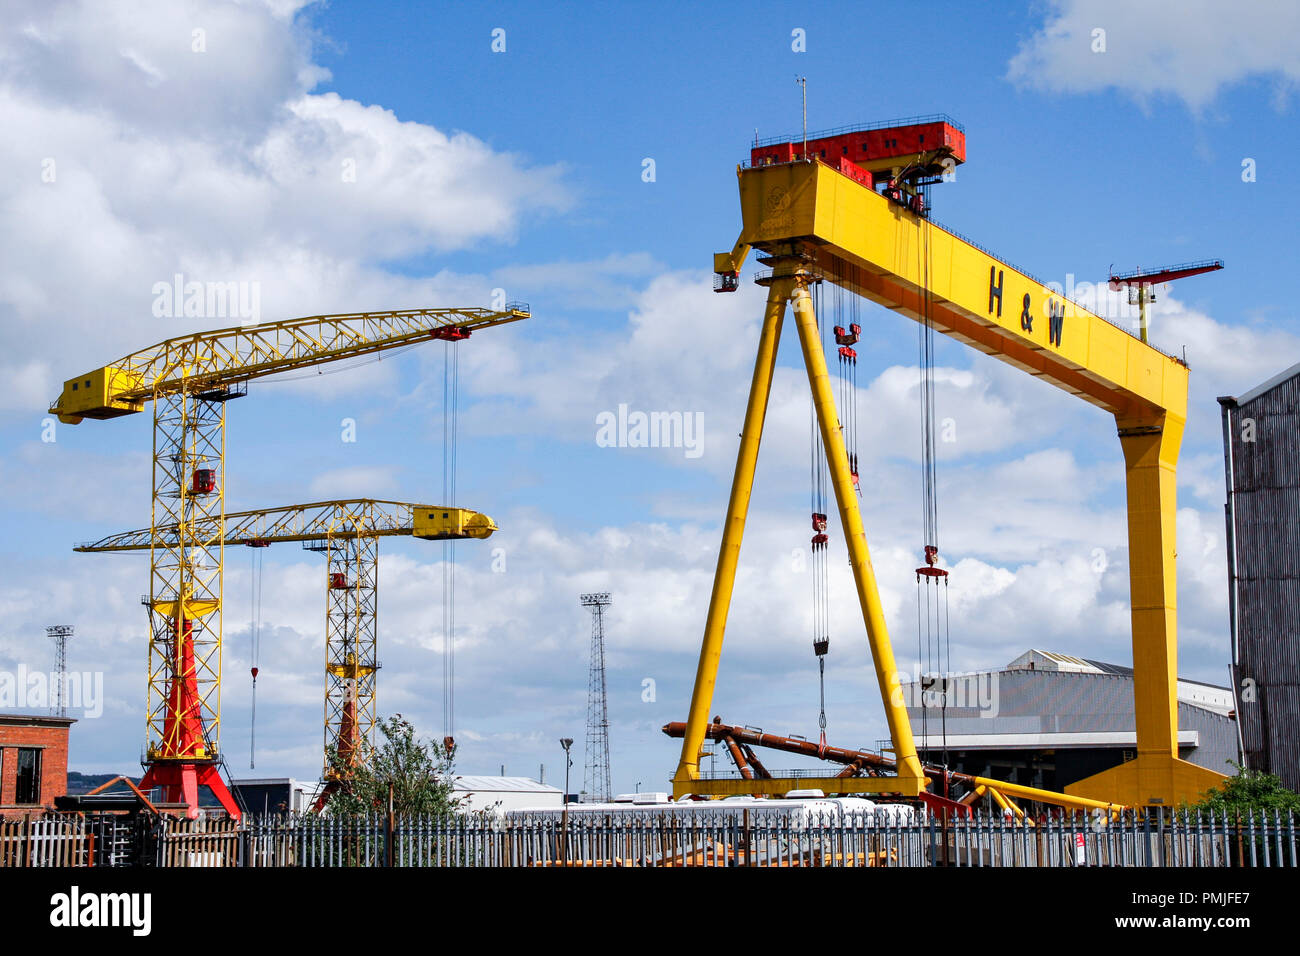 One of the famous yellow Harland and Wolff cranes at the shipyard in the Titanic Quarter of Belfast, Northern Ireland Stock Photo